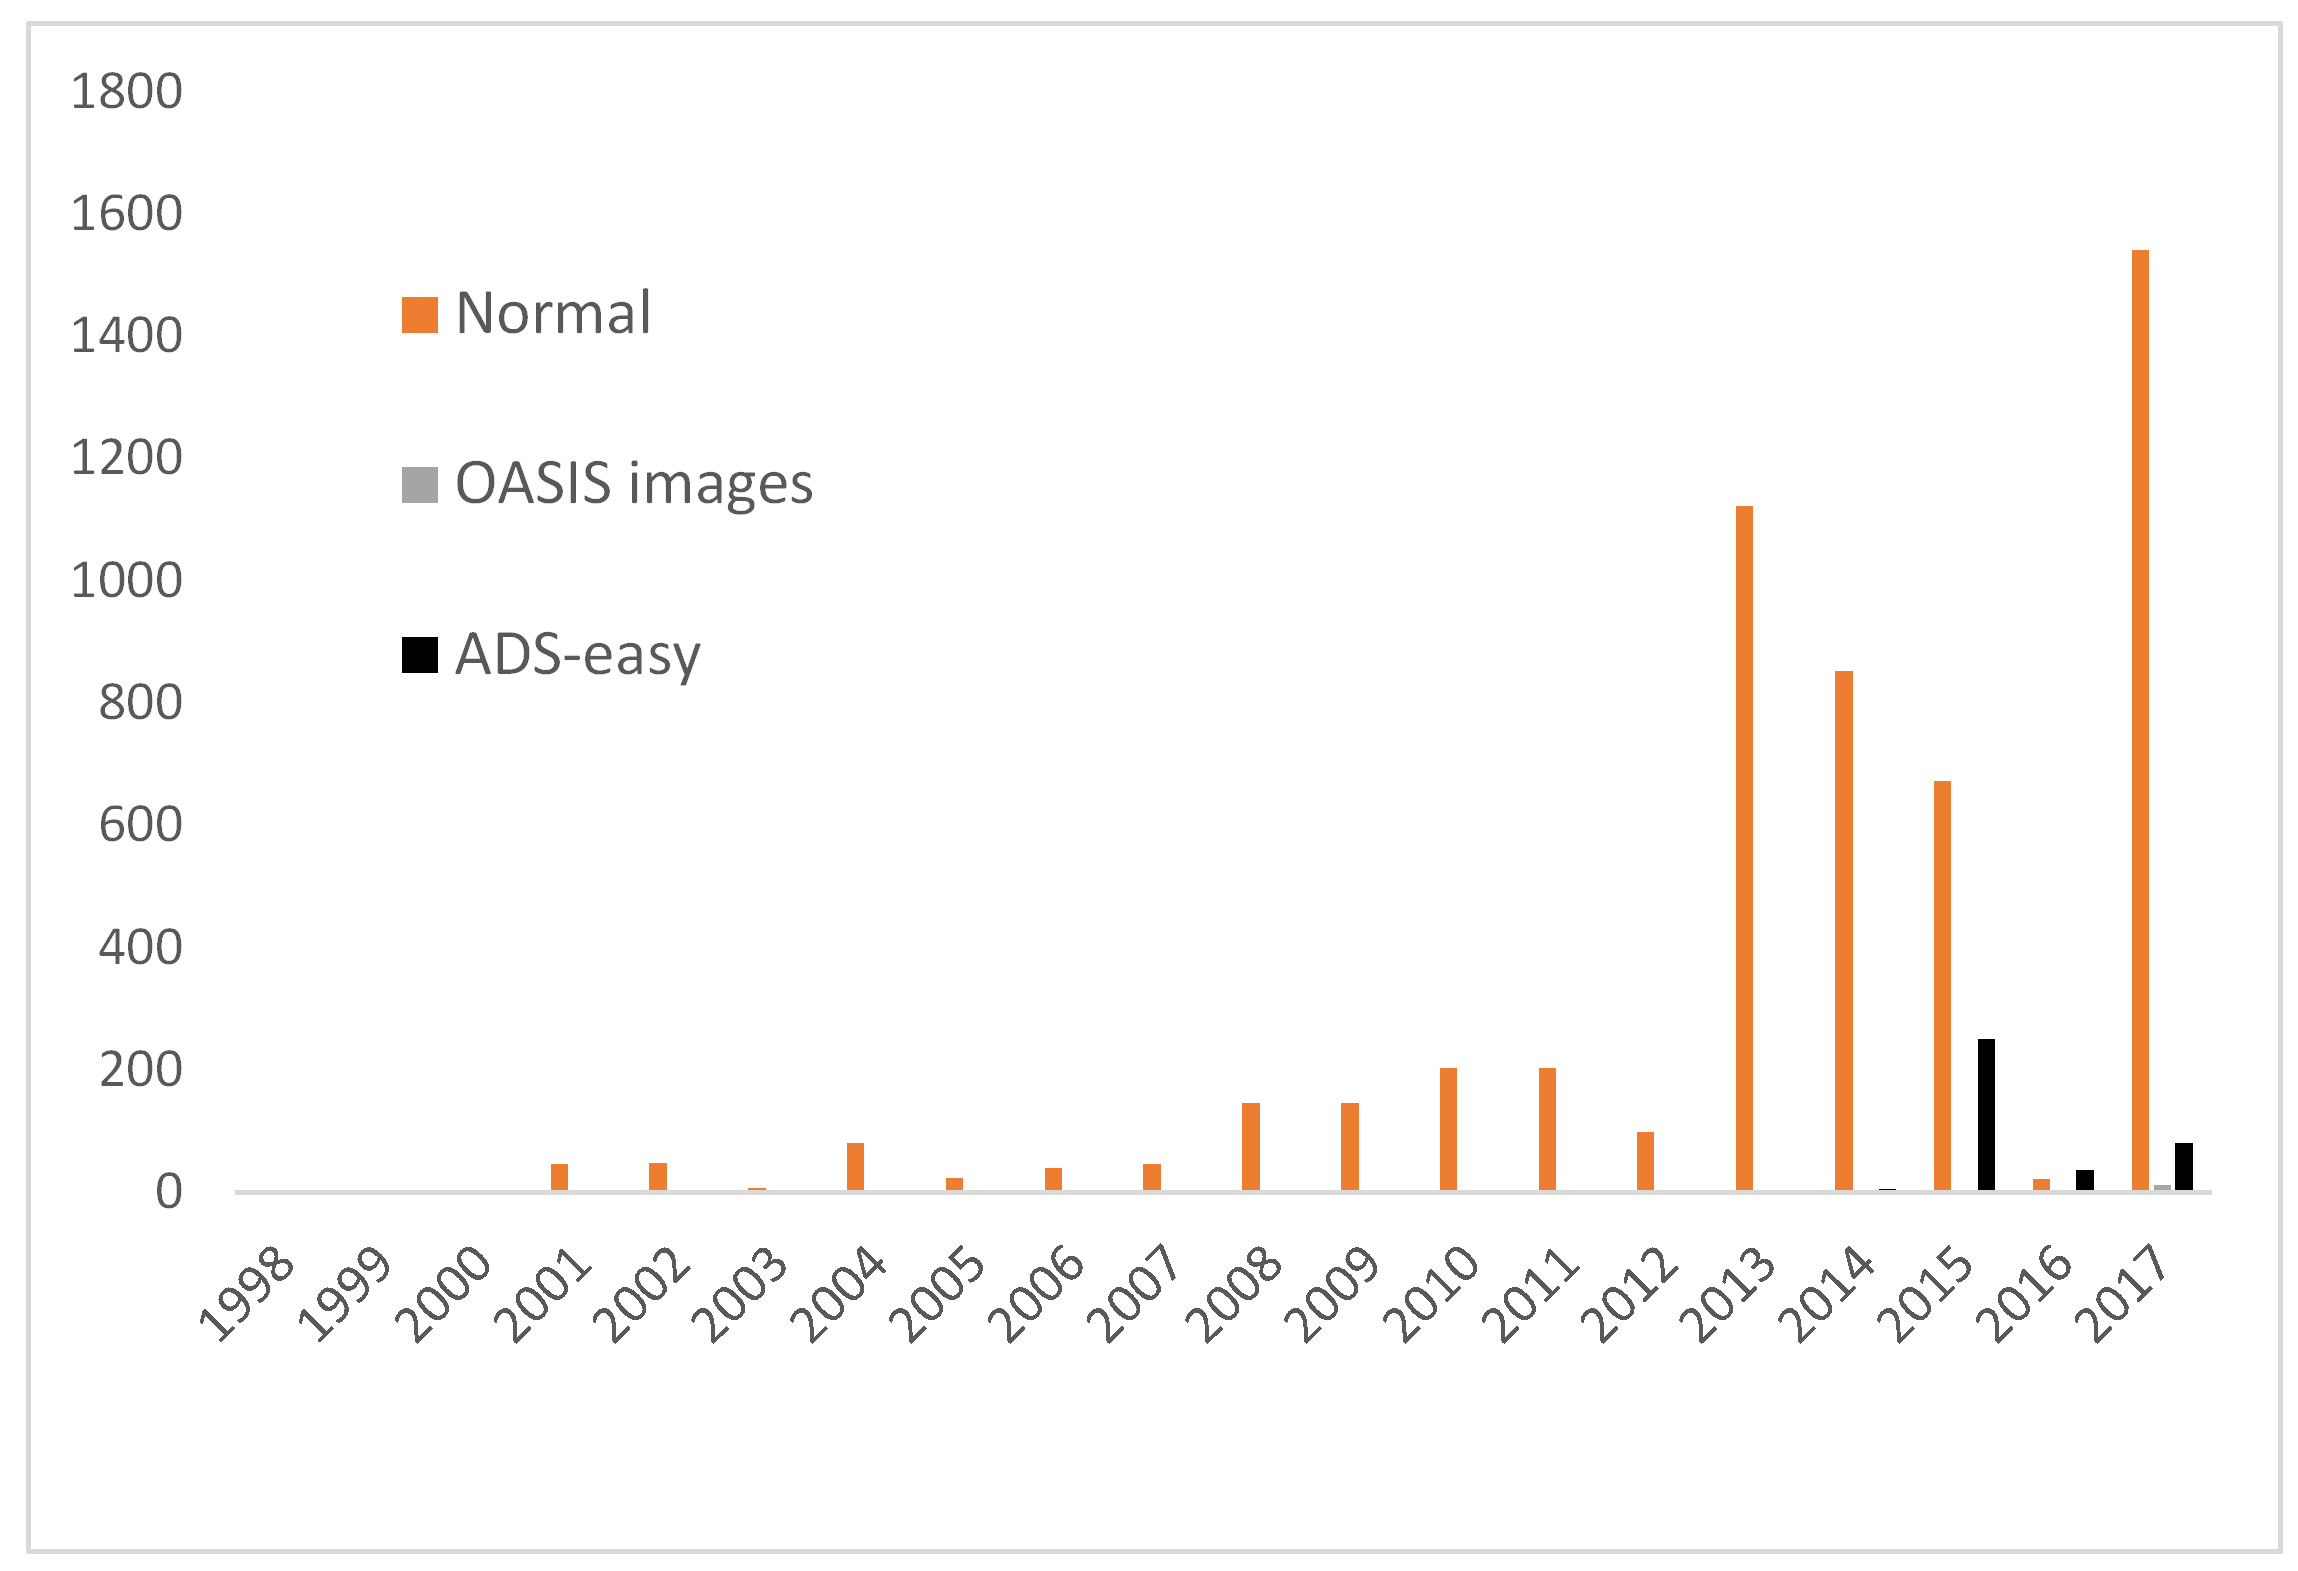 Bar chart showing Size (Gb) of Accessions from Normal archives, ADS-easy and OASIS images, ADS 1998-2017